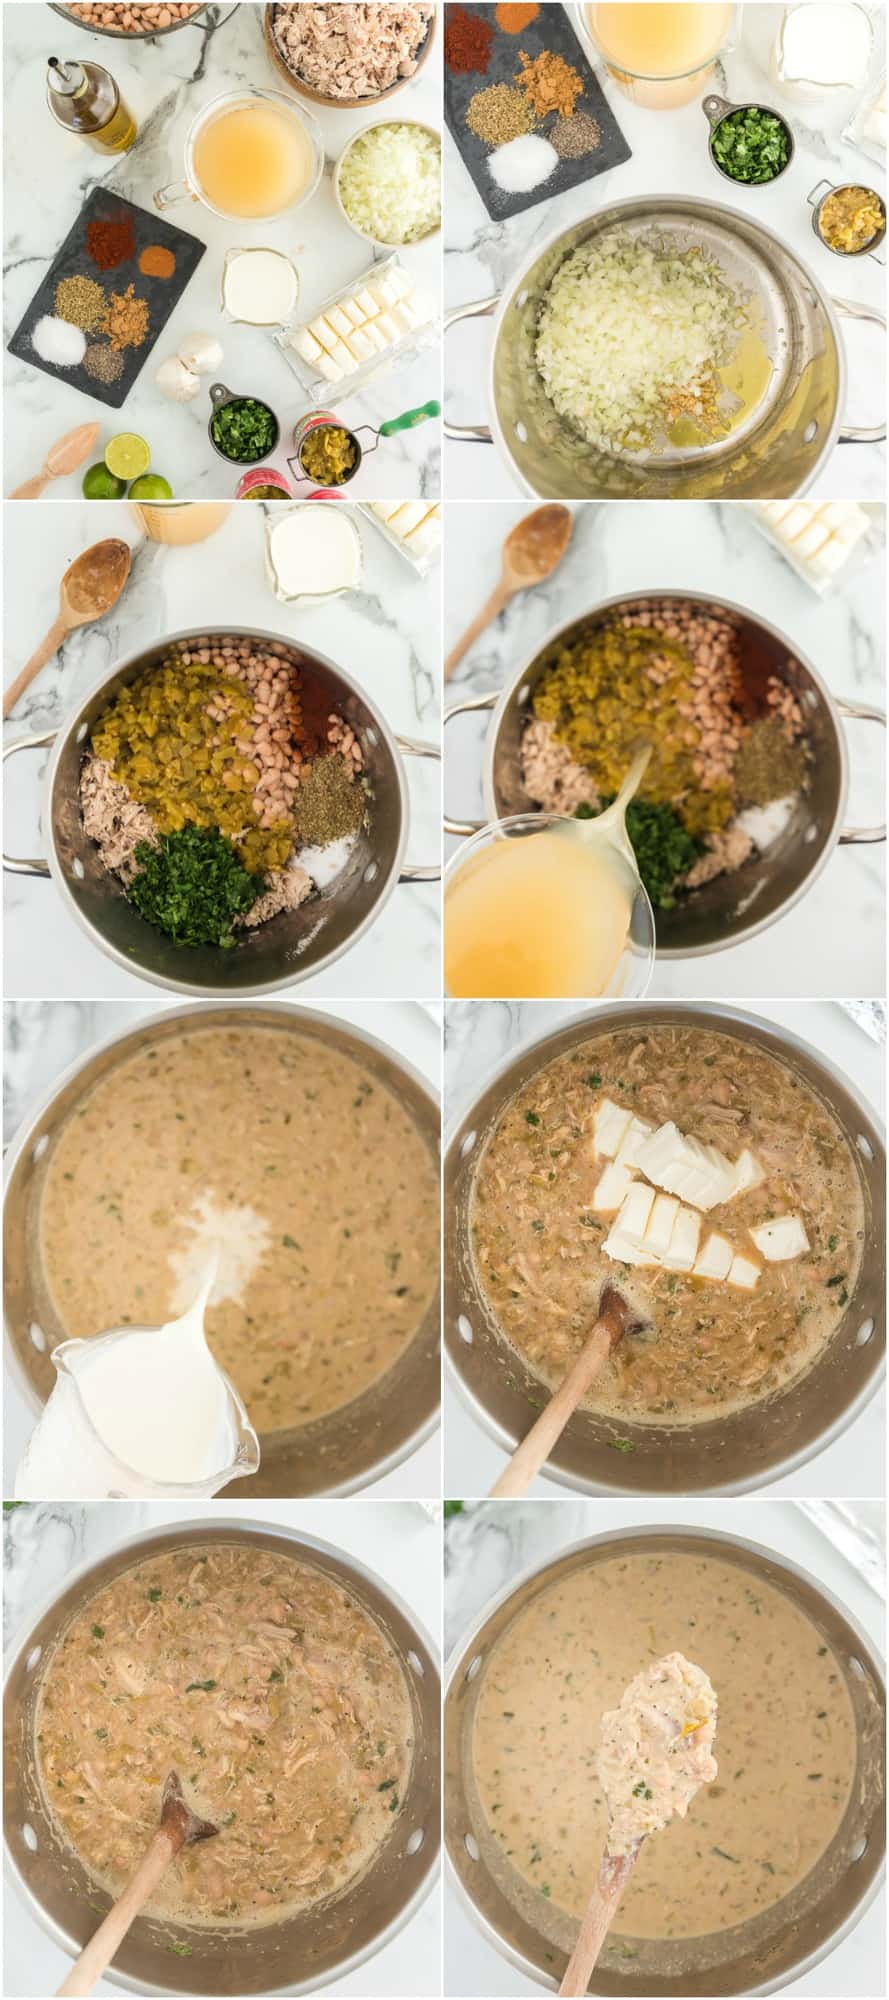 step by step photo instructions showing how to make white chicken chili, along with the ingredients